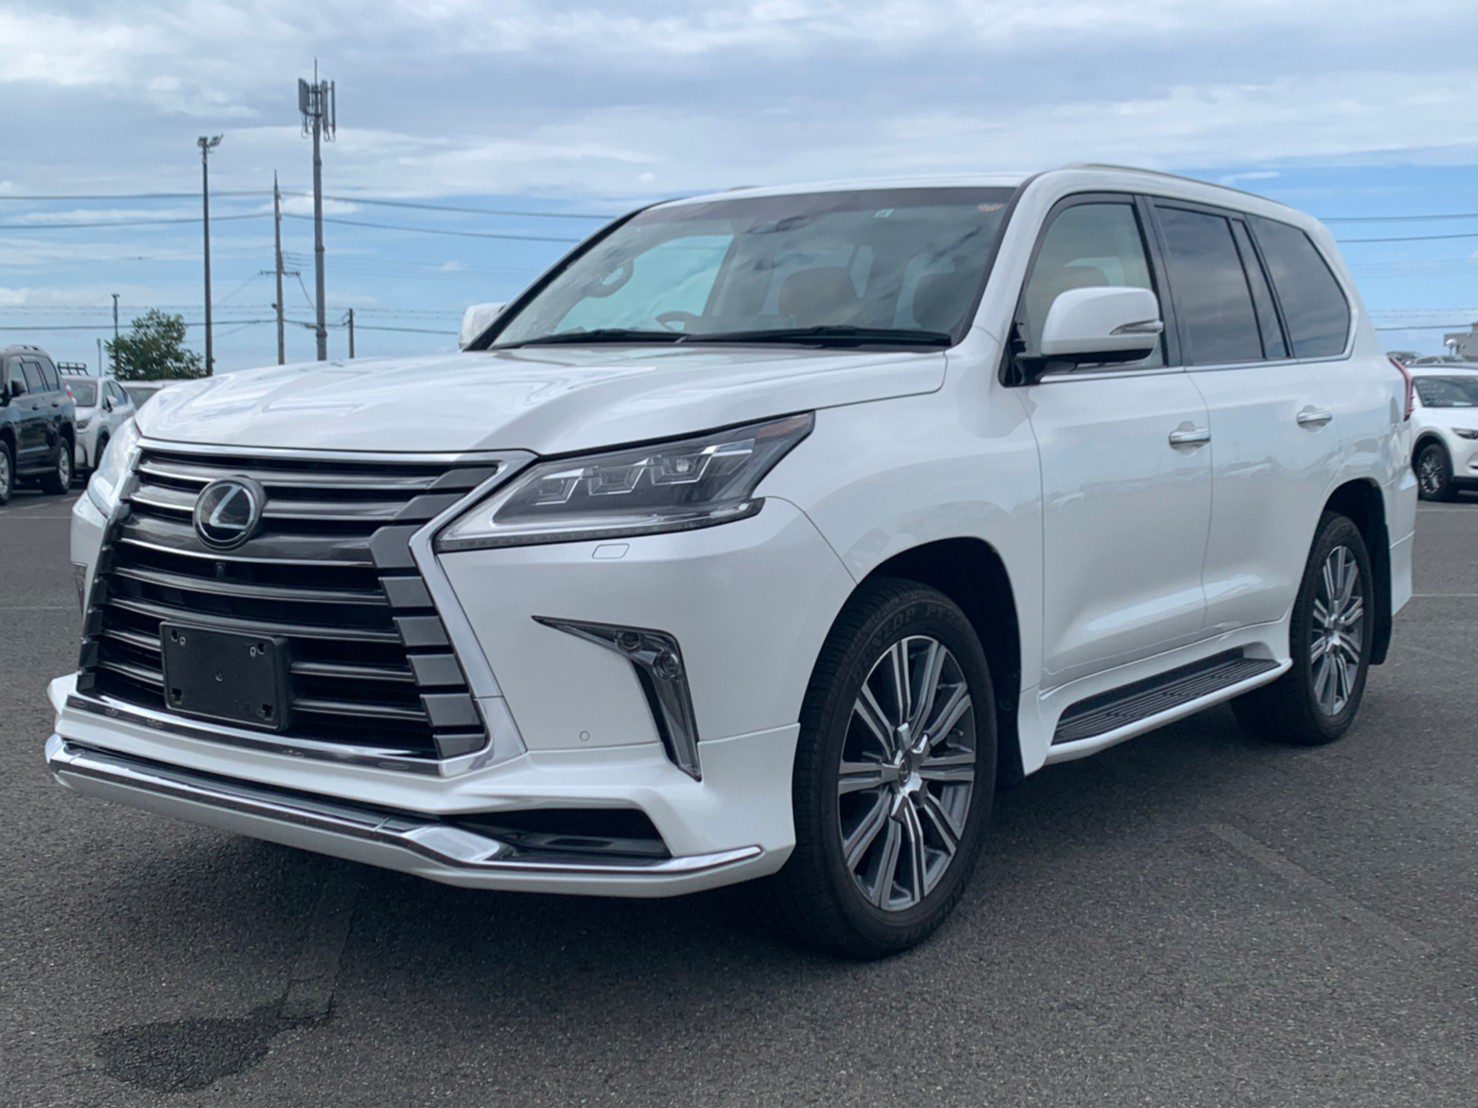 LEXUS LX 570 Just ARRIVED Fully Loaded OK EXCLUSIVE For SALE in Kenya